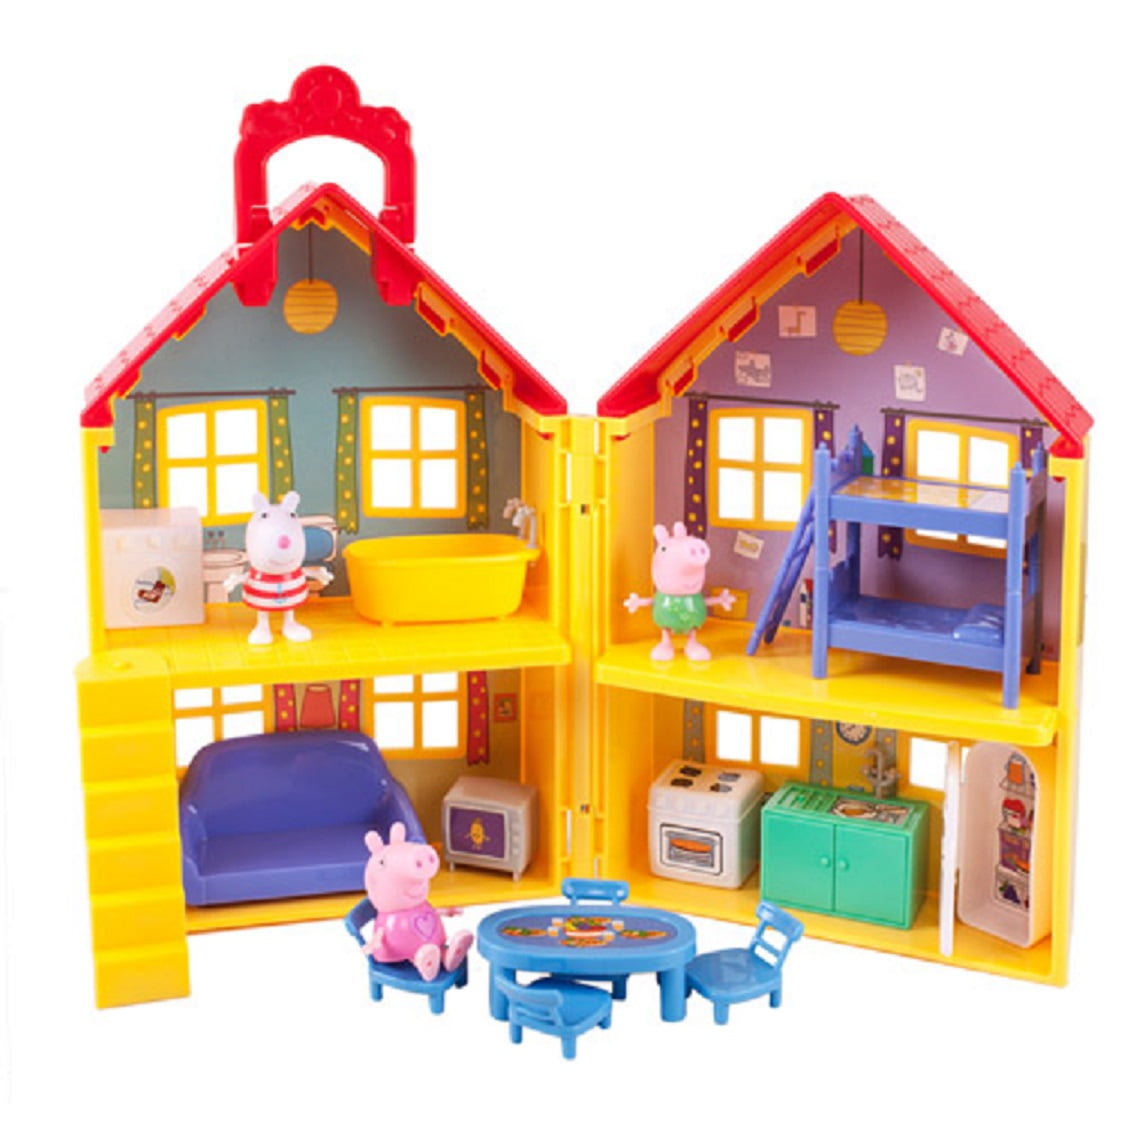 PEPPA PIG Peppa's Grandparents House Play Set Toy RARE! Ages 3+ NEW!!